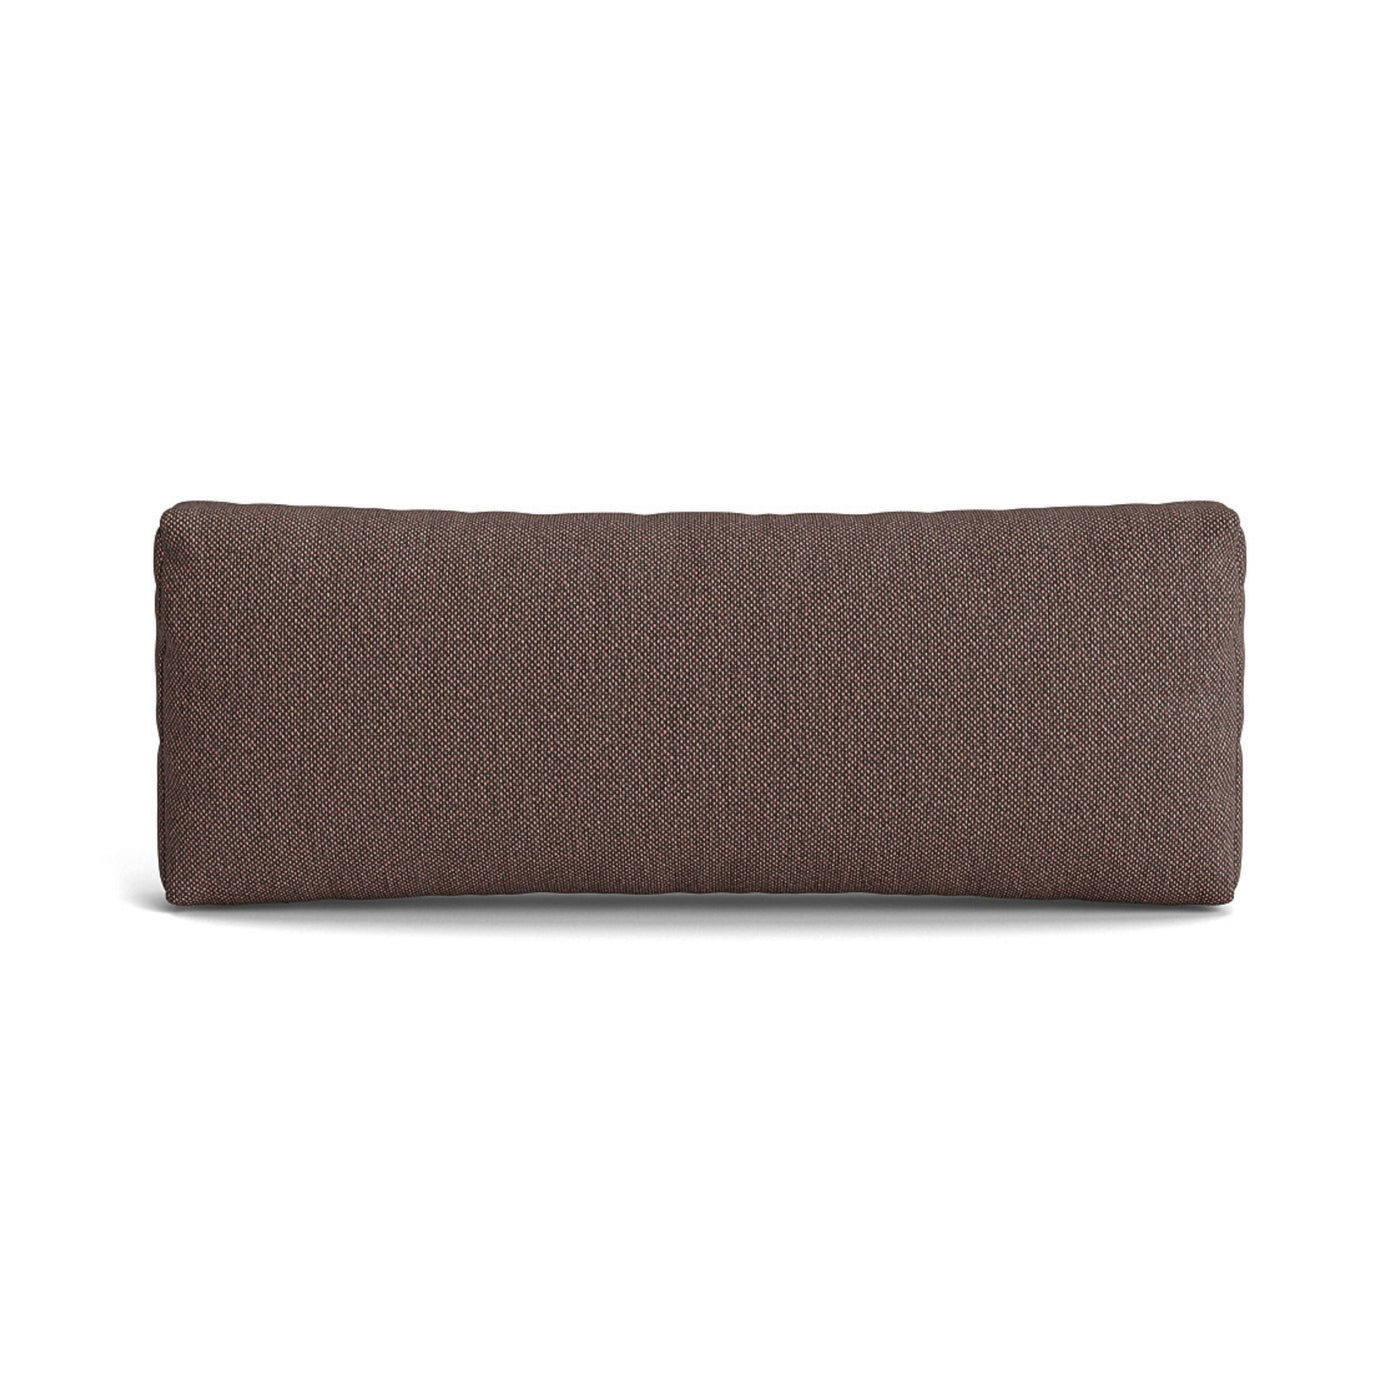 Muuto Connect Soft Modular Sofa Cushion. Shop online at someday designs. #colour_clay-6-red-brown